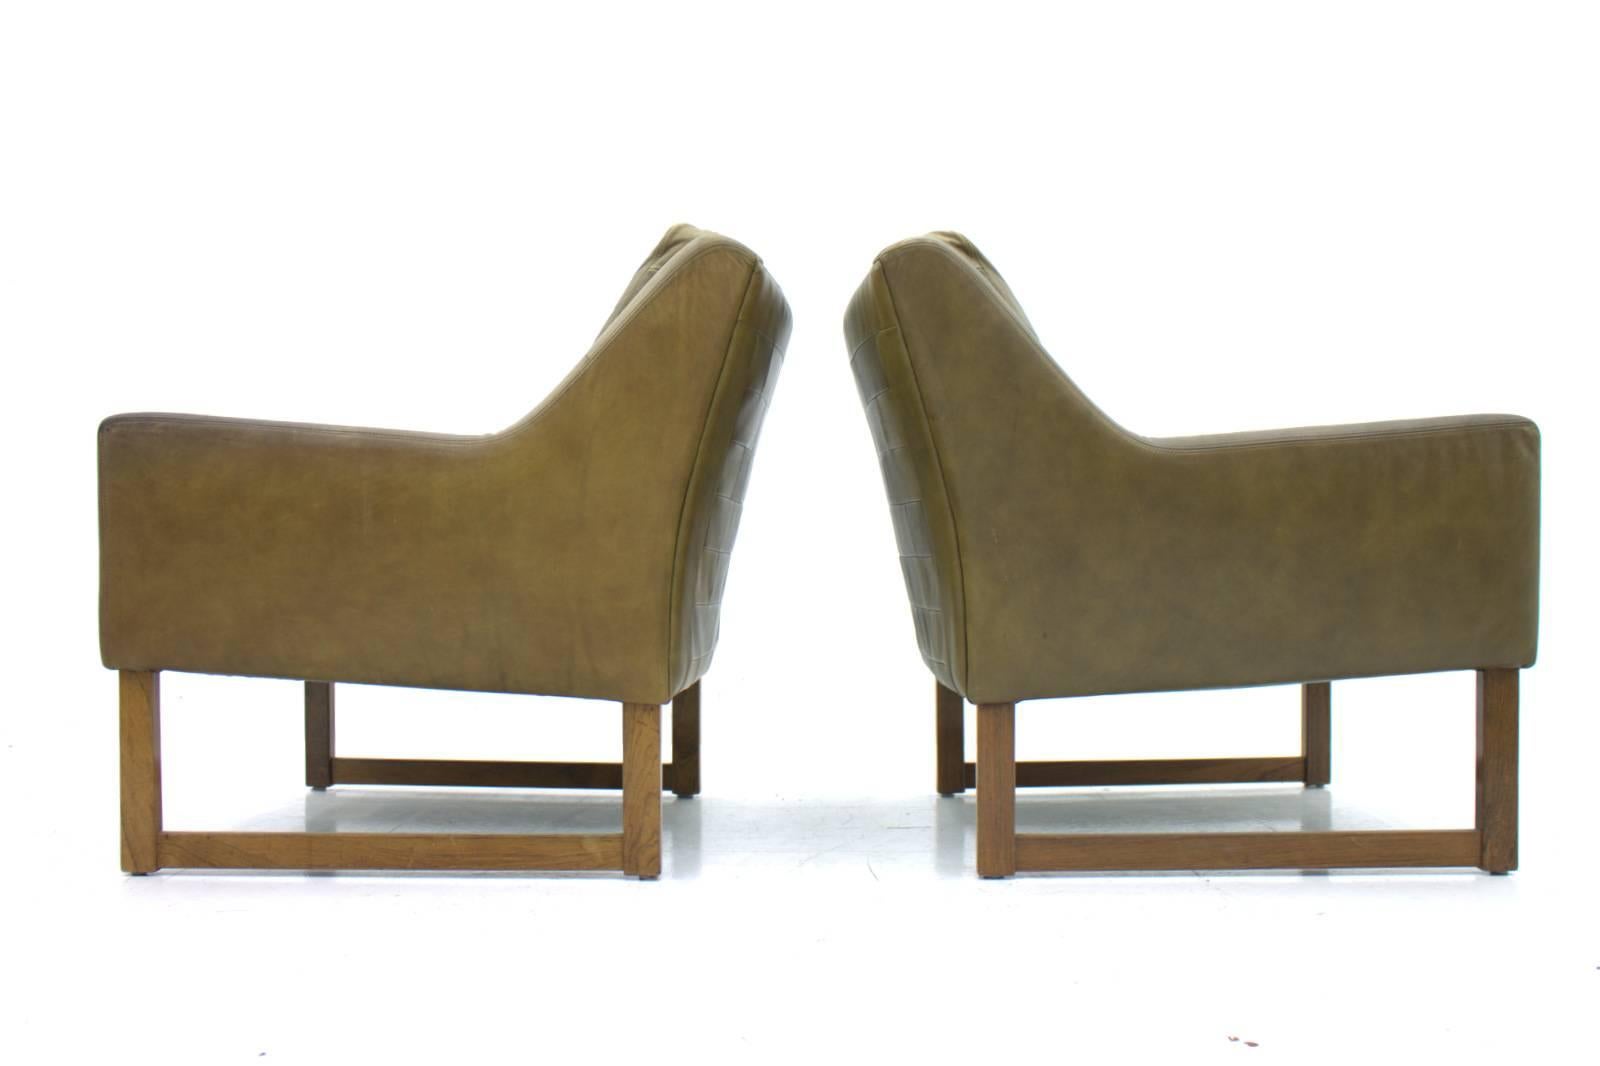 Pair of lounge chairs by Rudolf Glatzel for Kill International, 1960s. Leather and rosewood.
Good vintage condition.

Worldwide shipping.